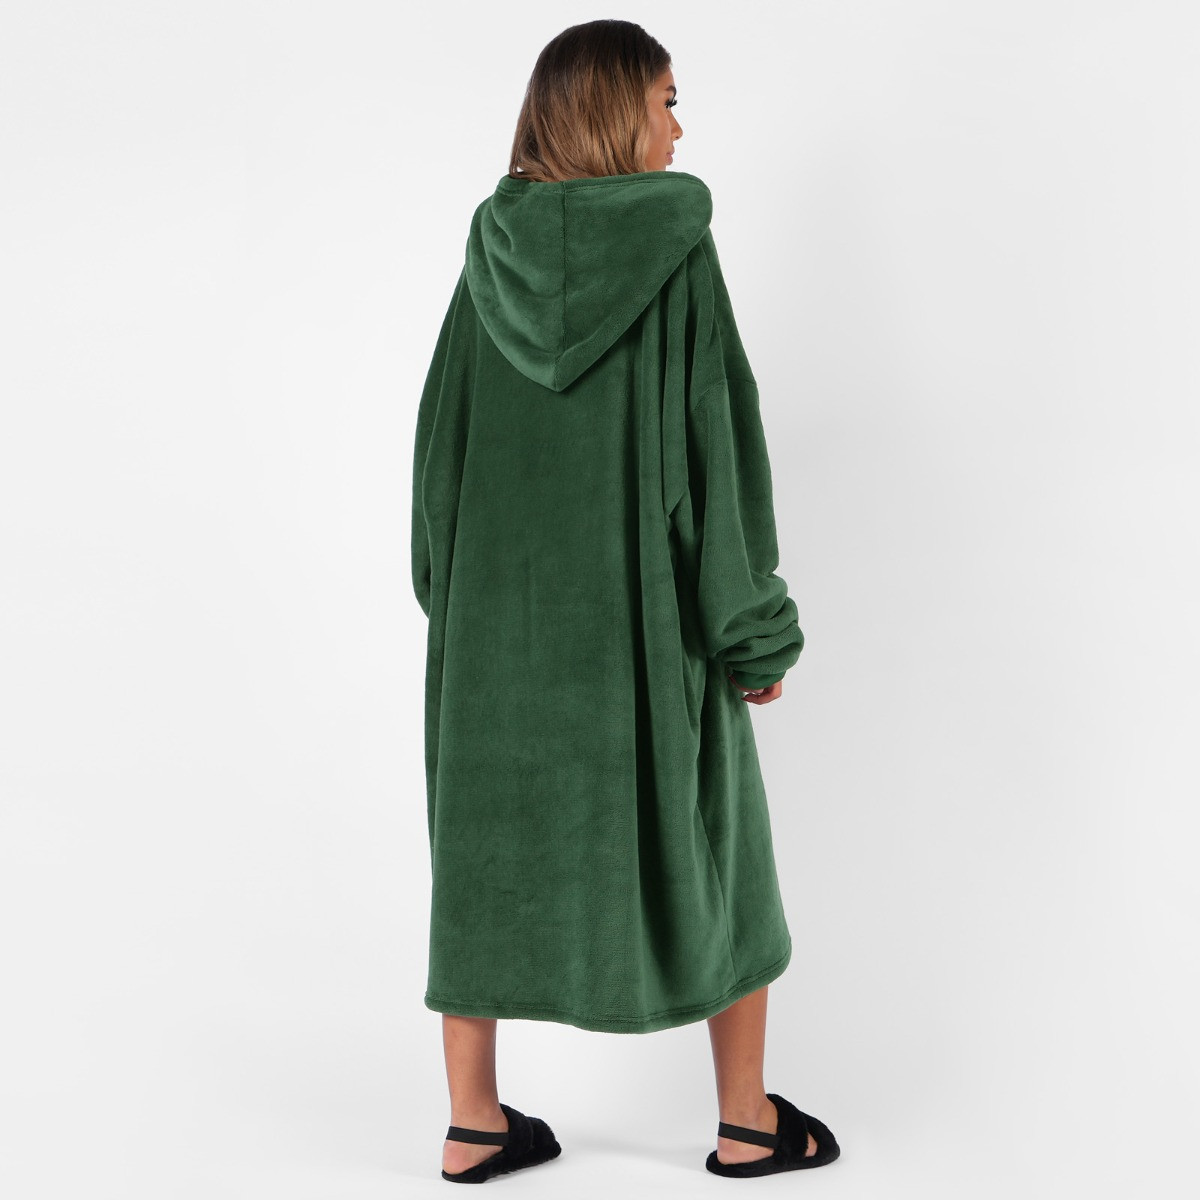 Sienna Extra-Long Sherpa Hoodie Blanket - Forest Green >